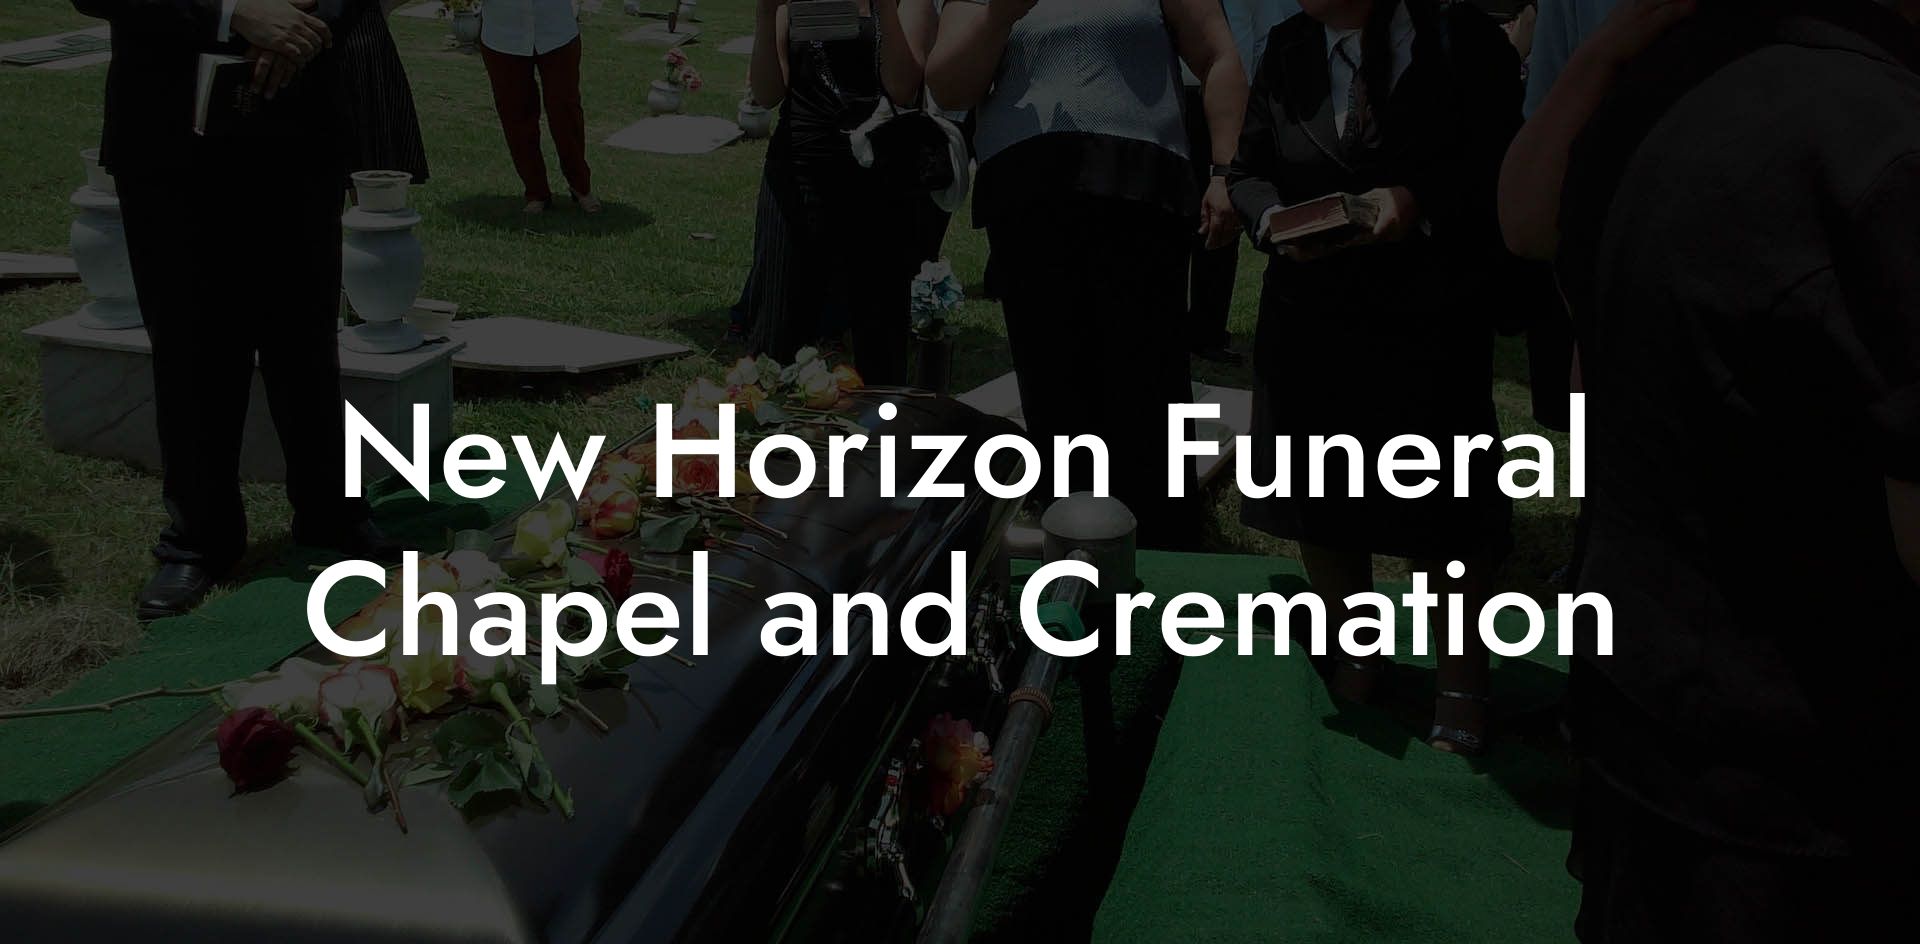 New Horizon Funeral Chapel and Cremation